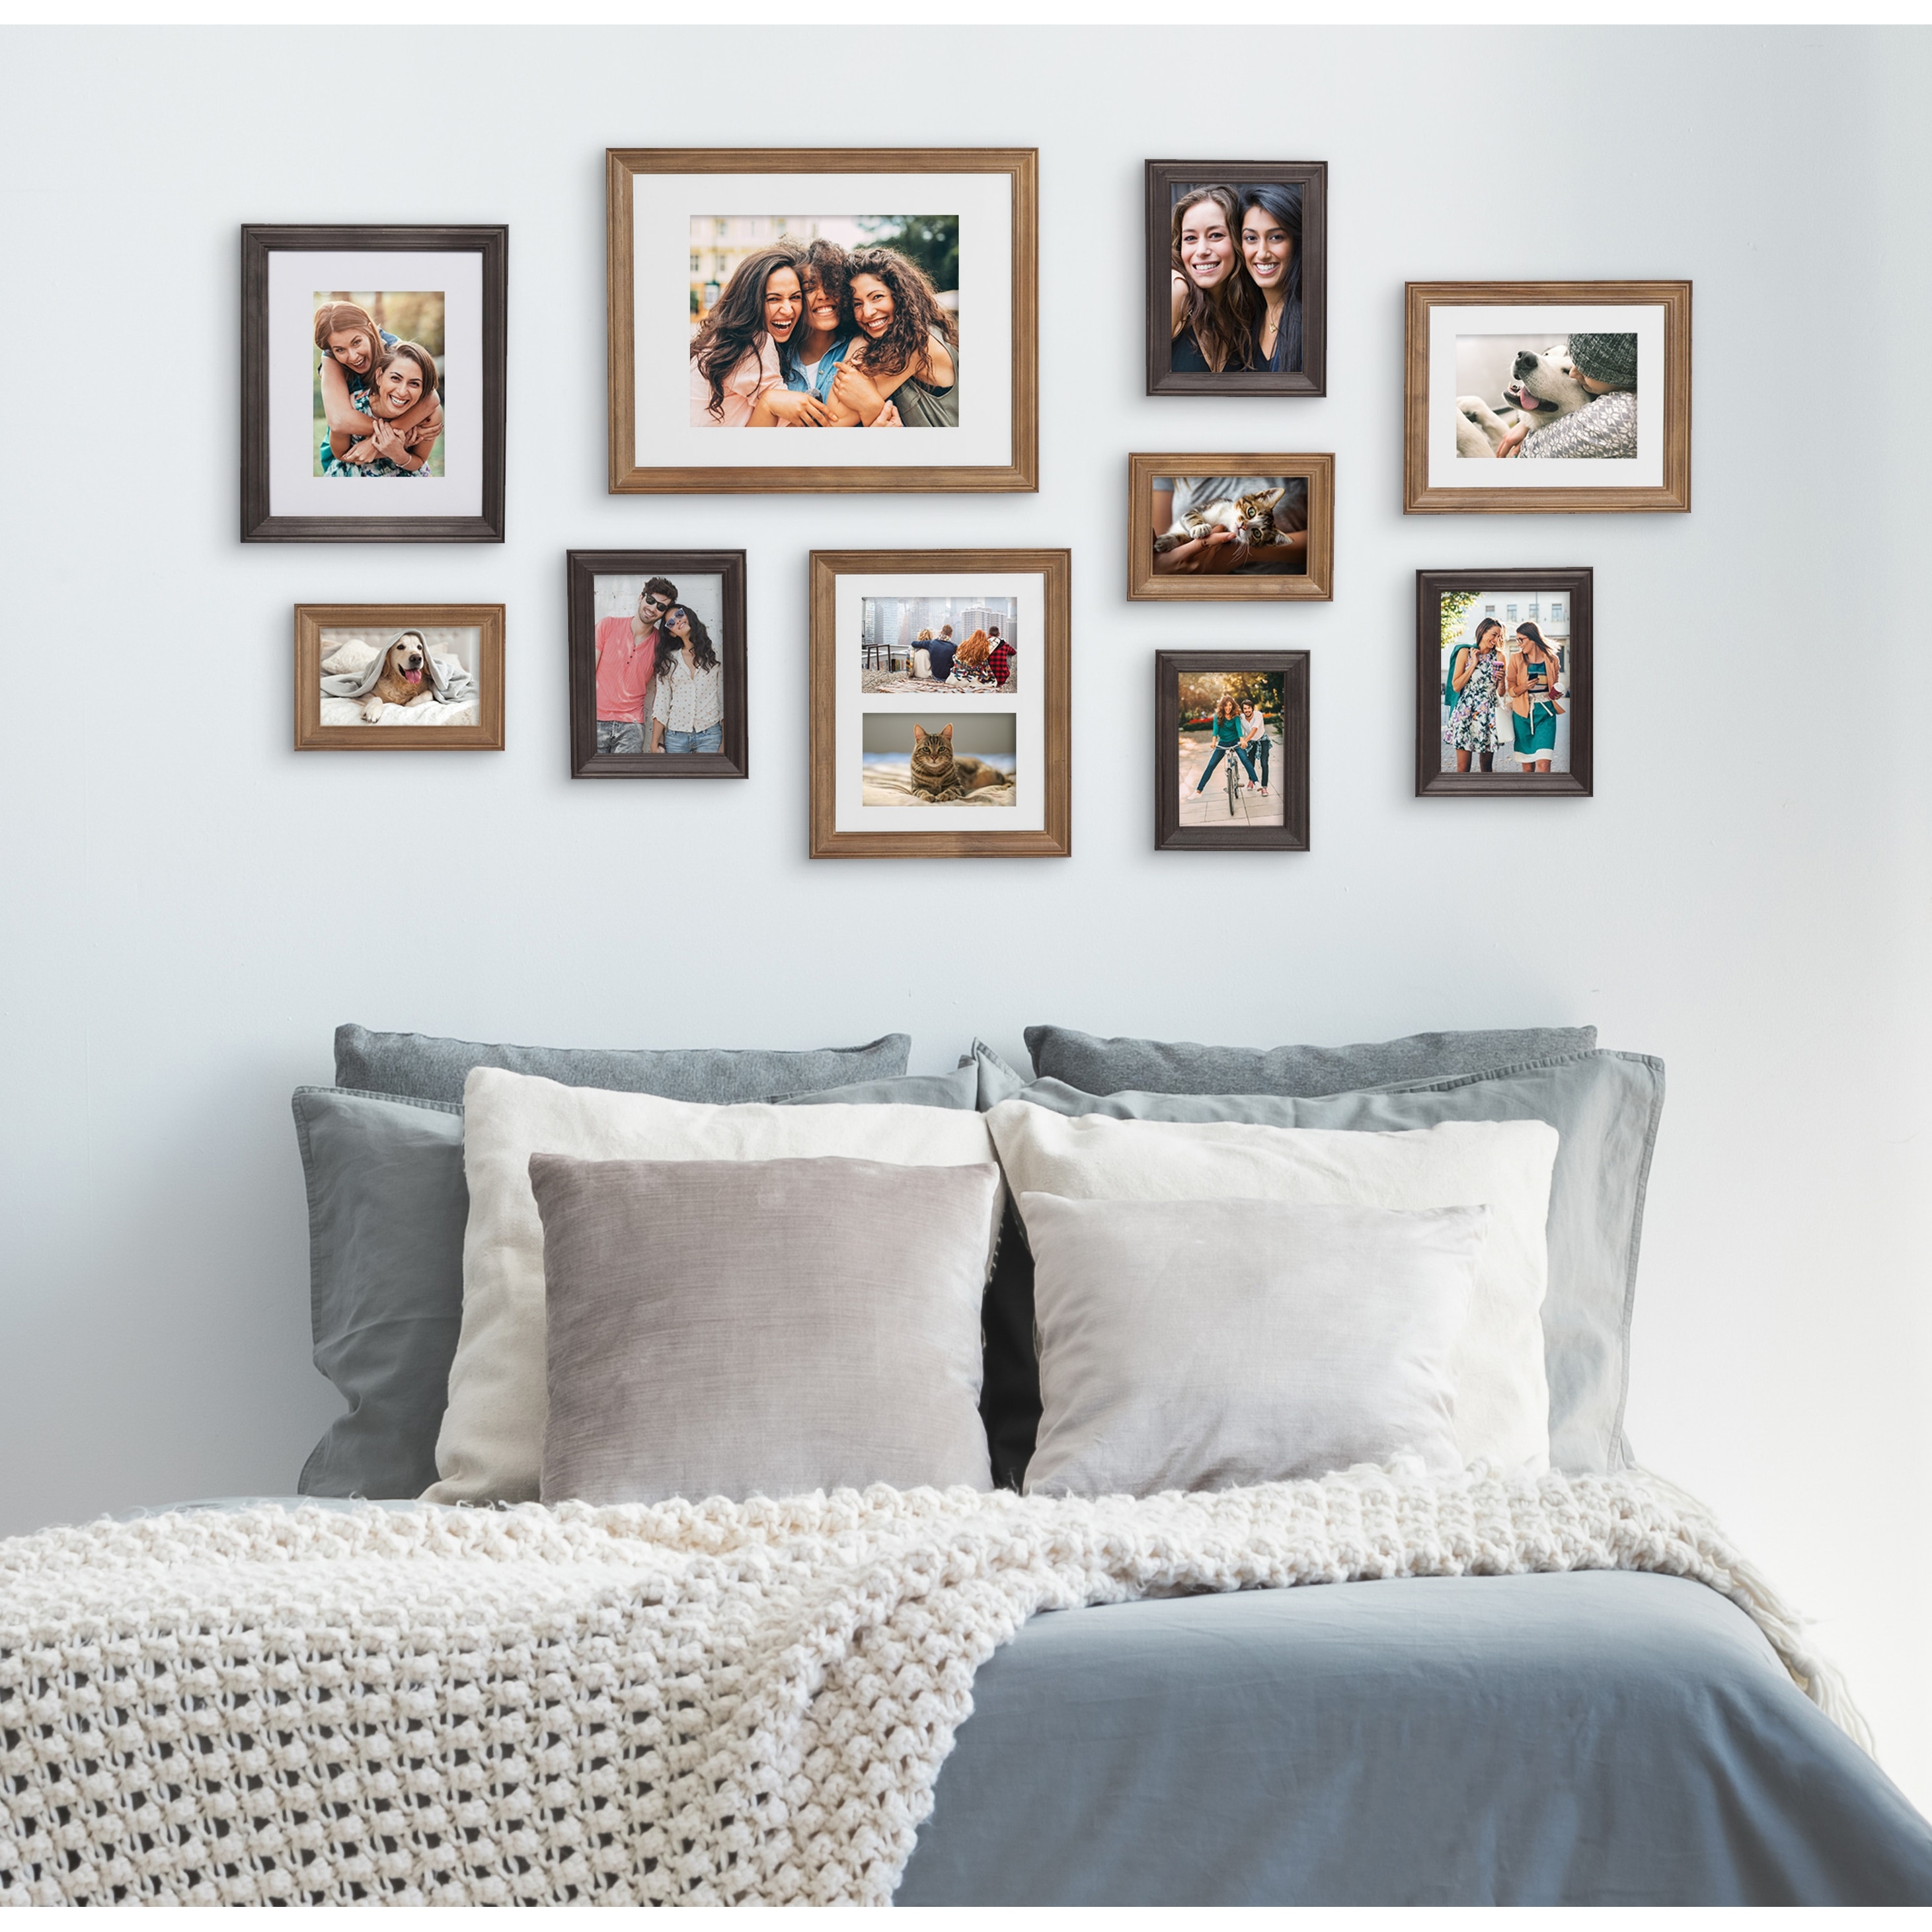 Gallery Wall Frame Set of 6, Multi-Size Picture Frames Collage